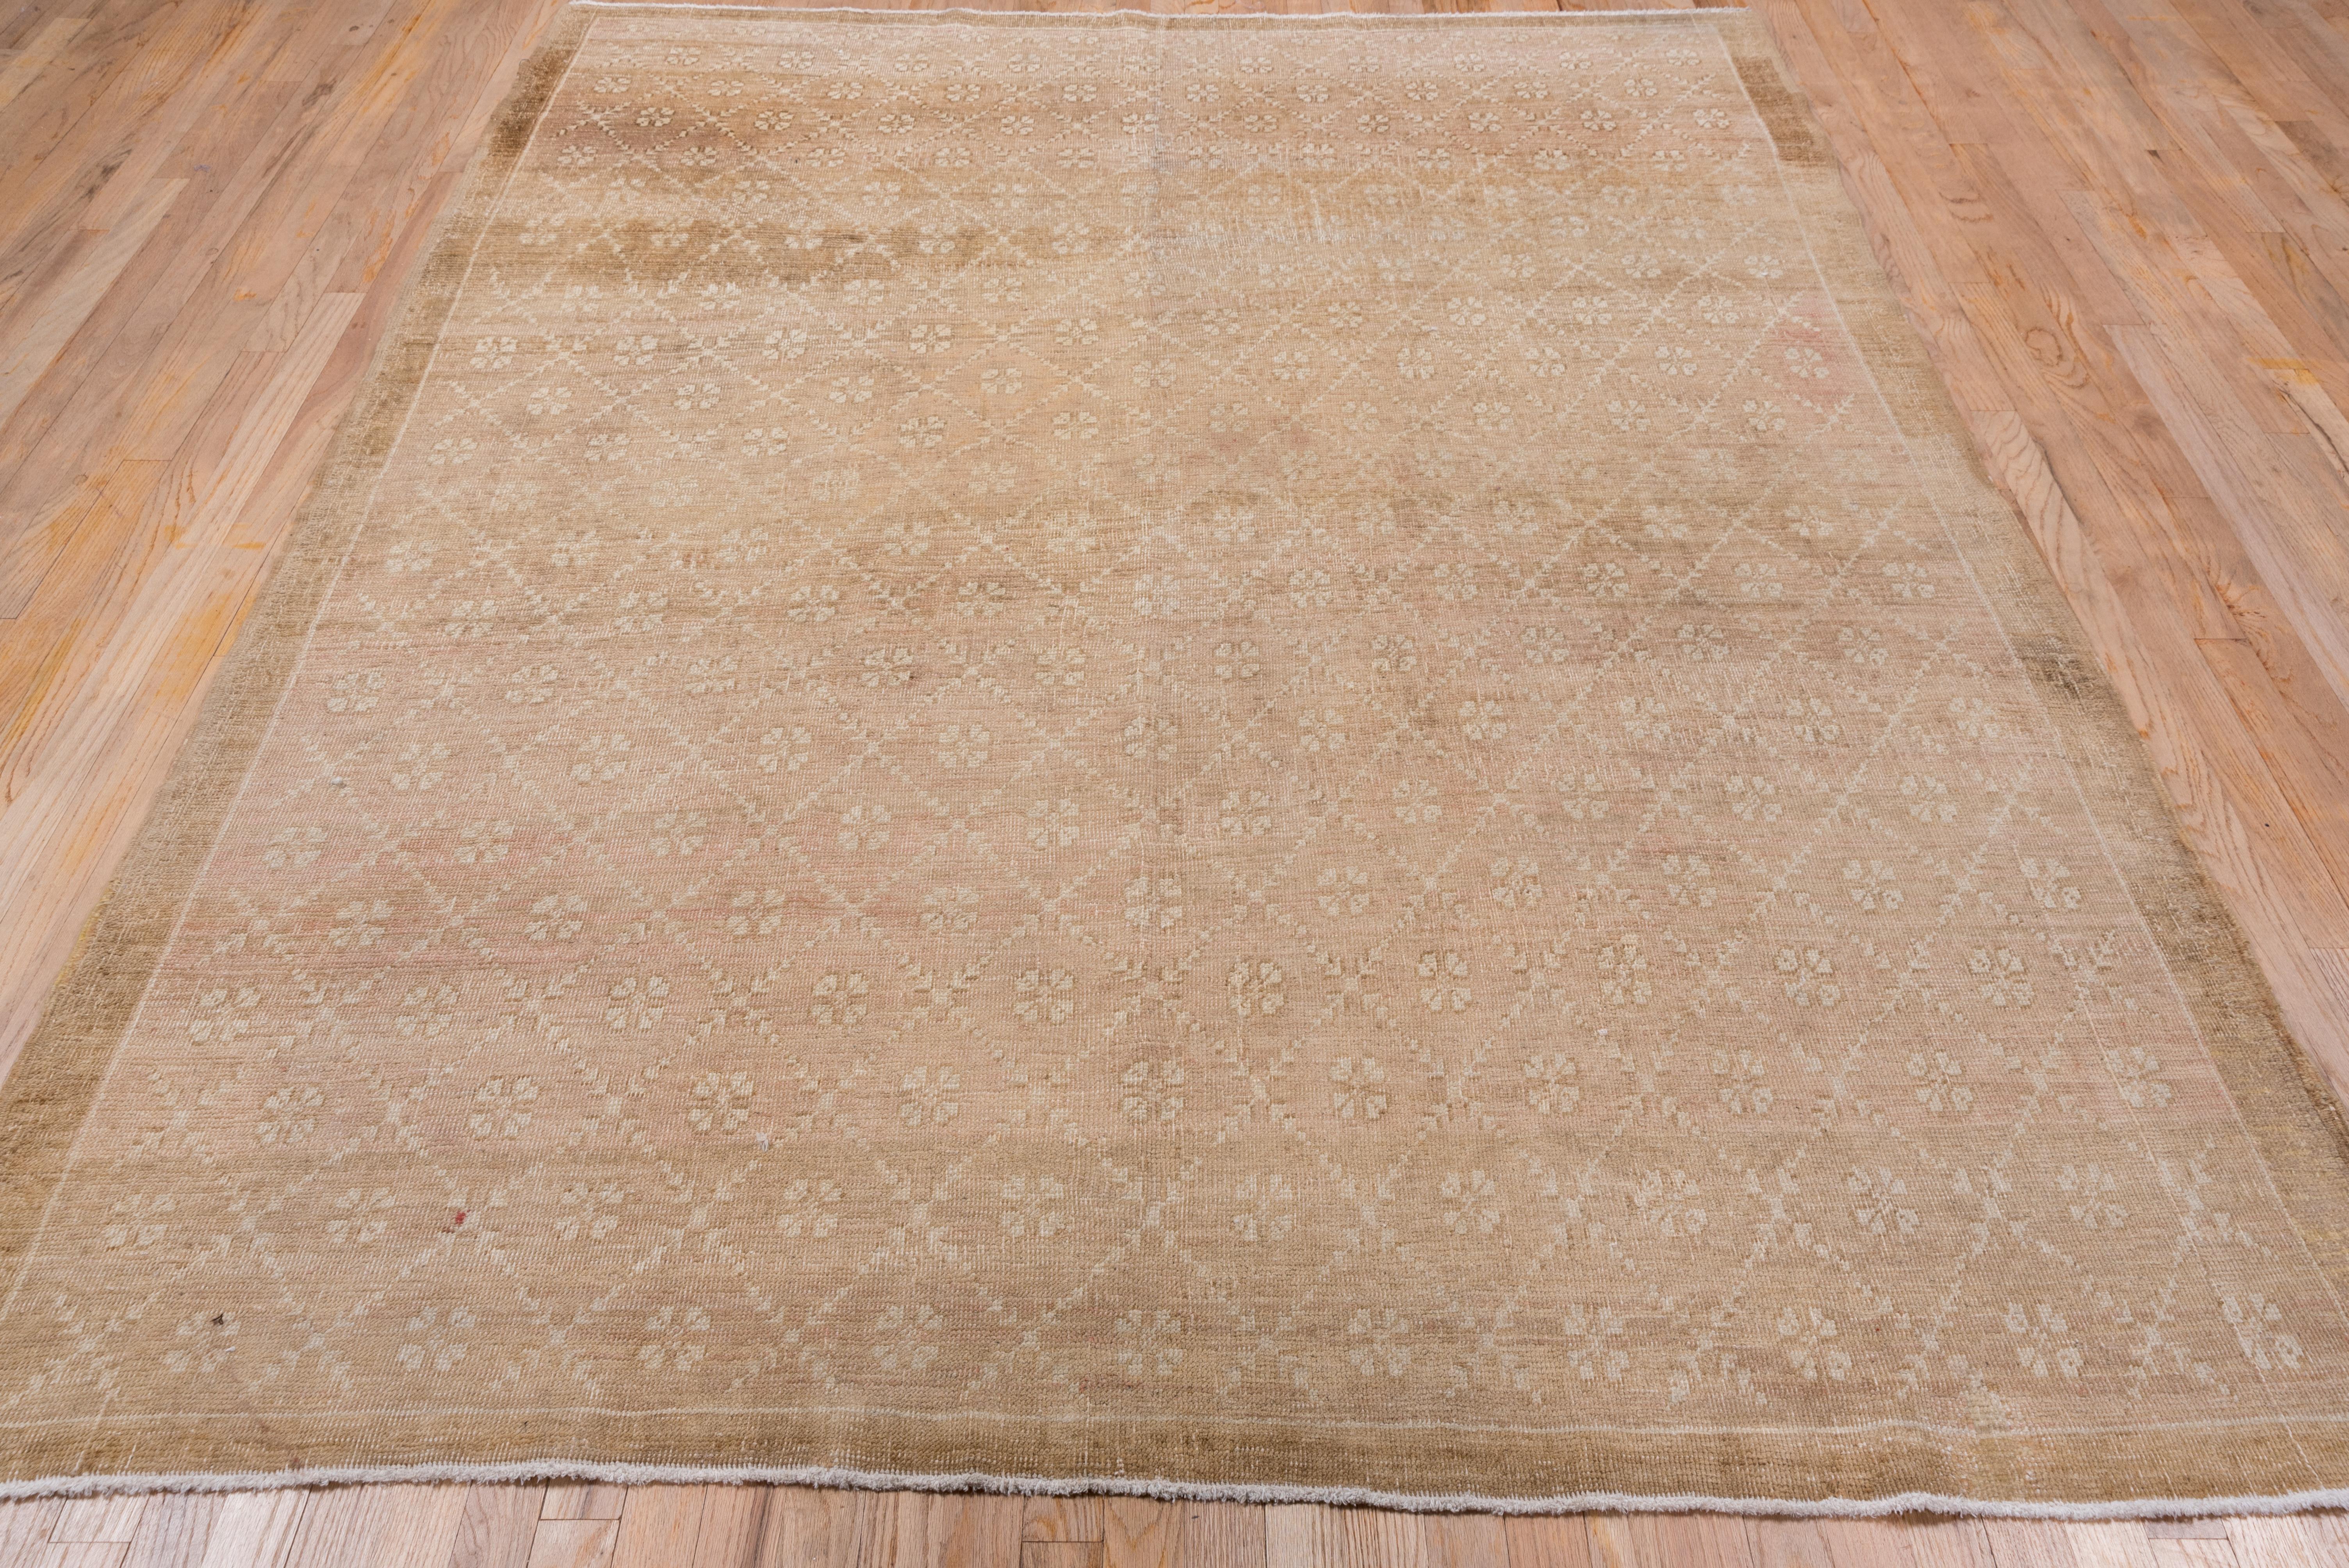 Hand-Knotted Rustic Oushak Rug, Mid-20th Century